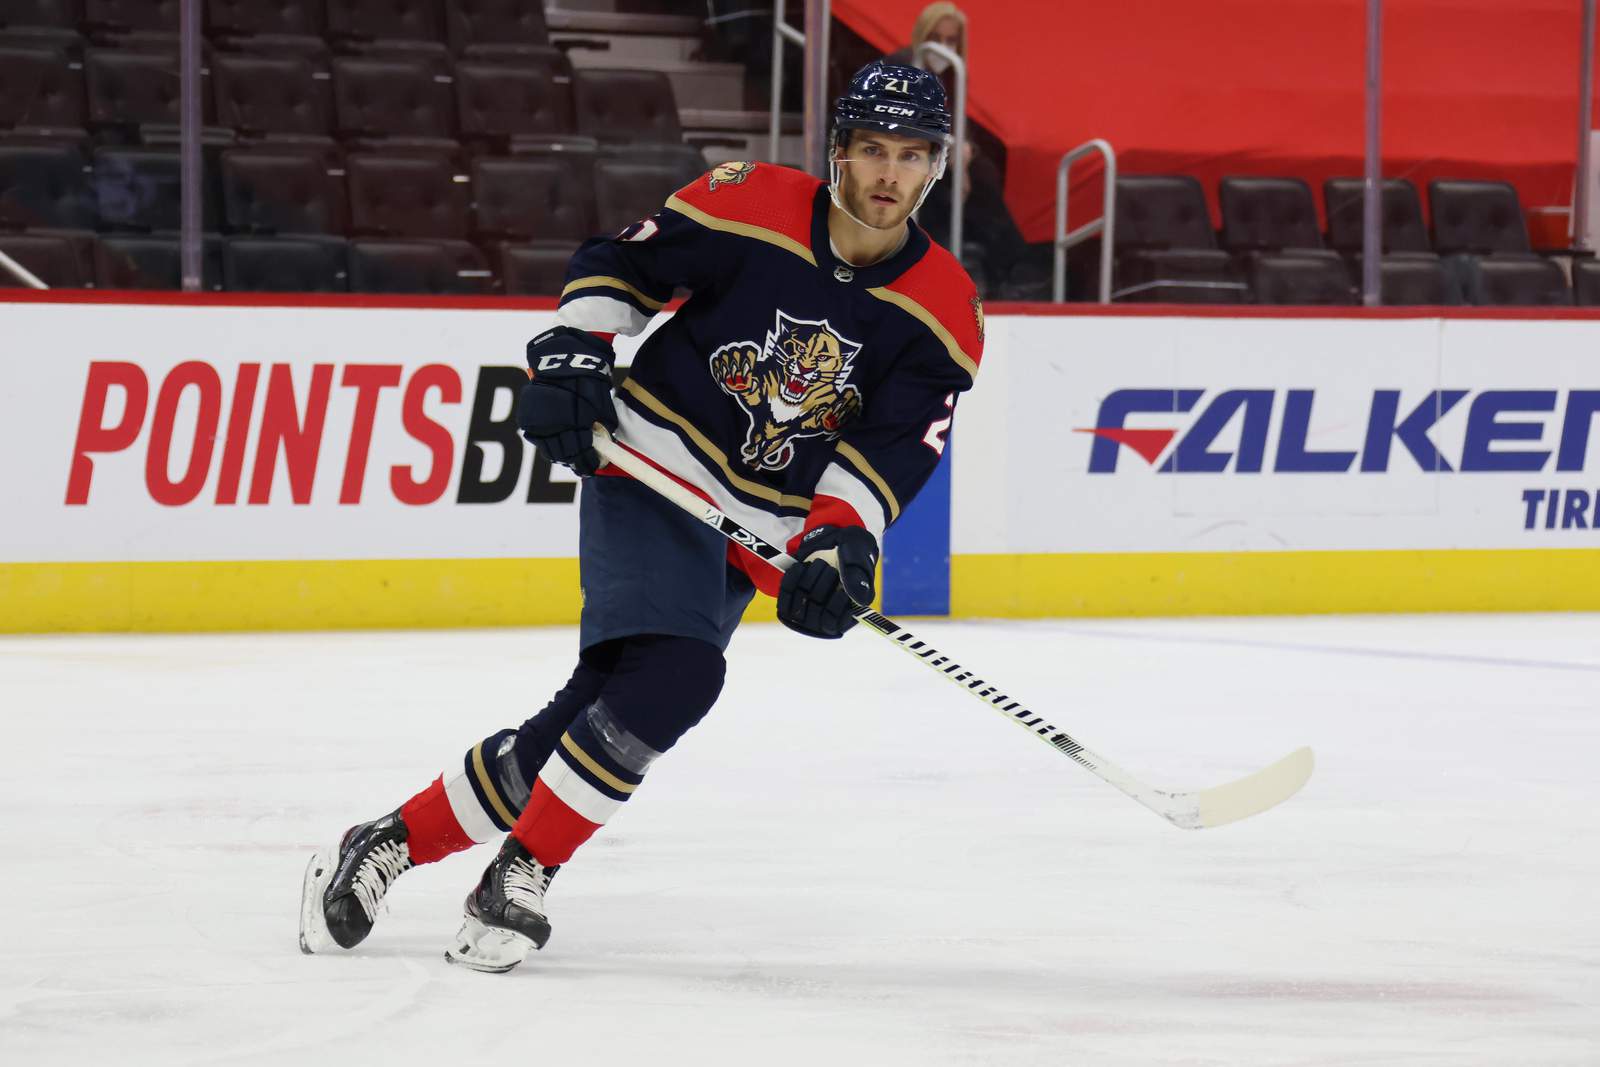 Wennberg scores first career hat trick as Panthers beat Blue Jackets 5-2 for fifth straight win